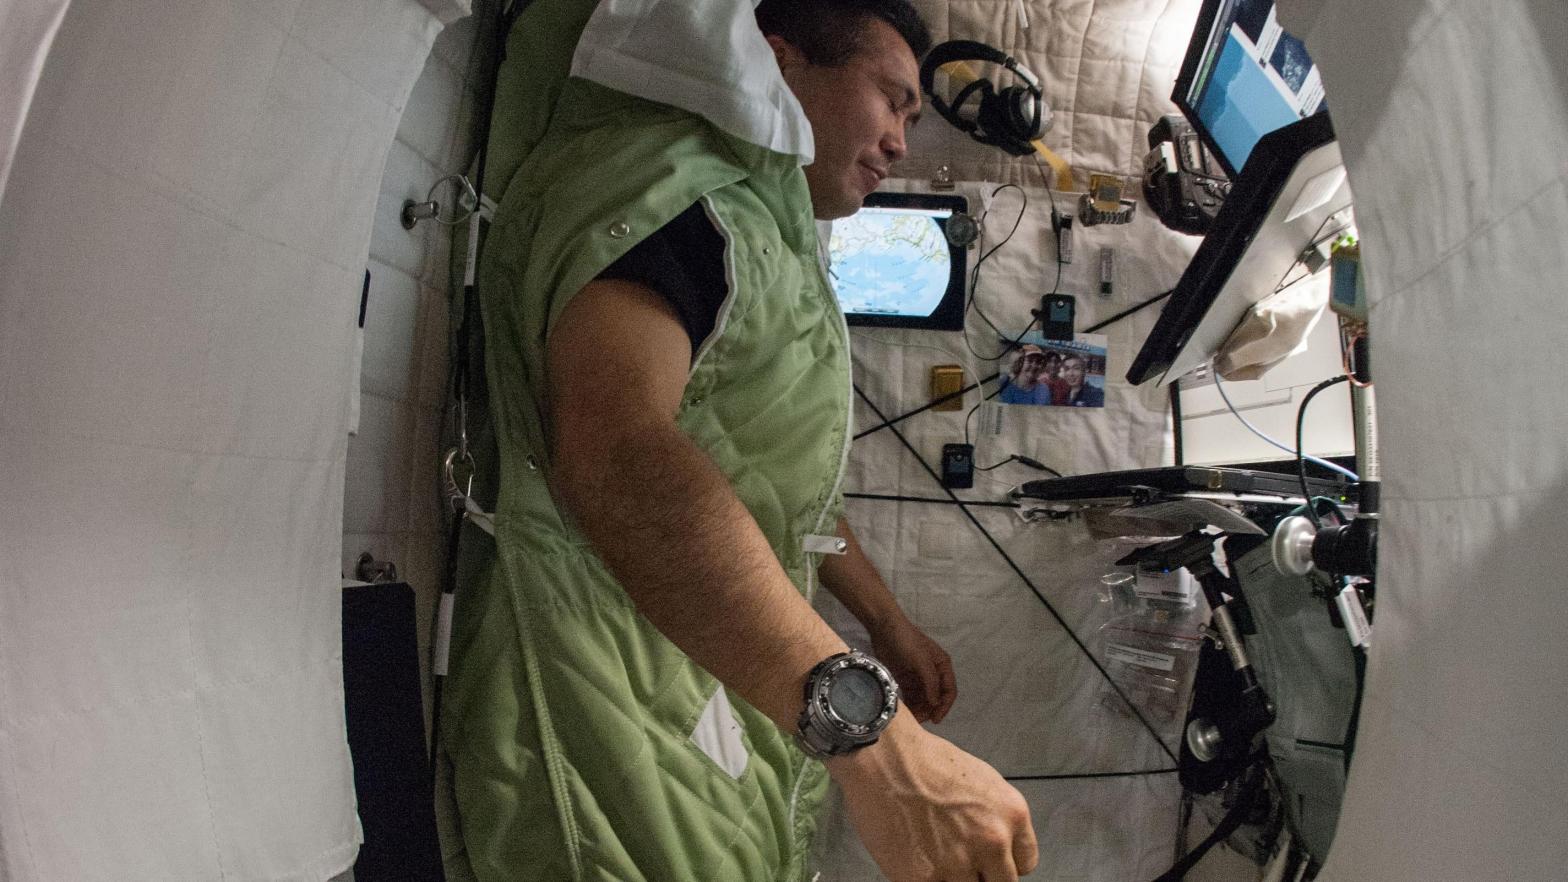 Astronaut Koichi Wakata, Expedition 38 Flight Engineer, strapped into his sleeping bag in his sleep station on board the ISS. (Photo: NASA)